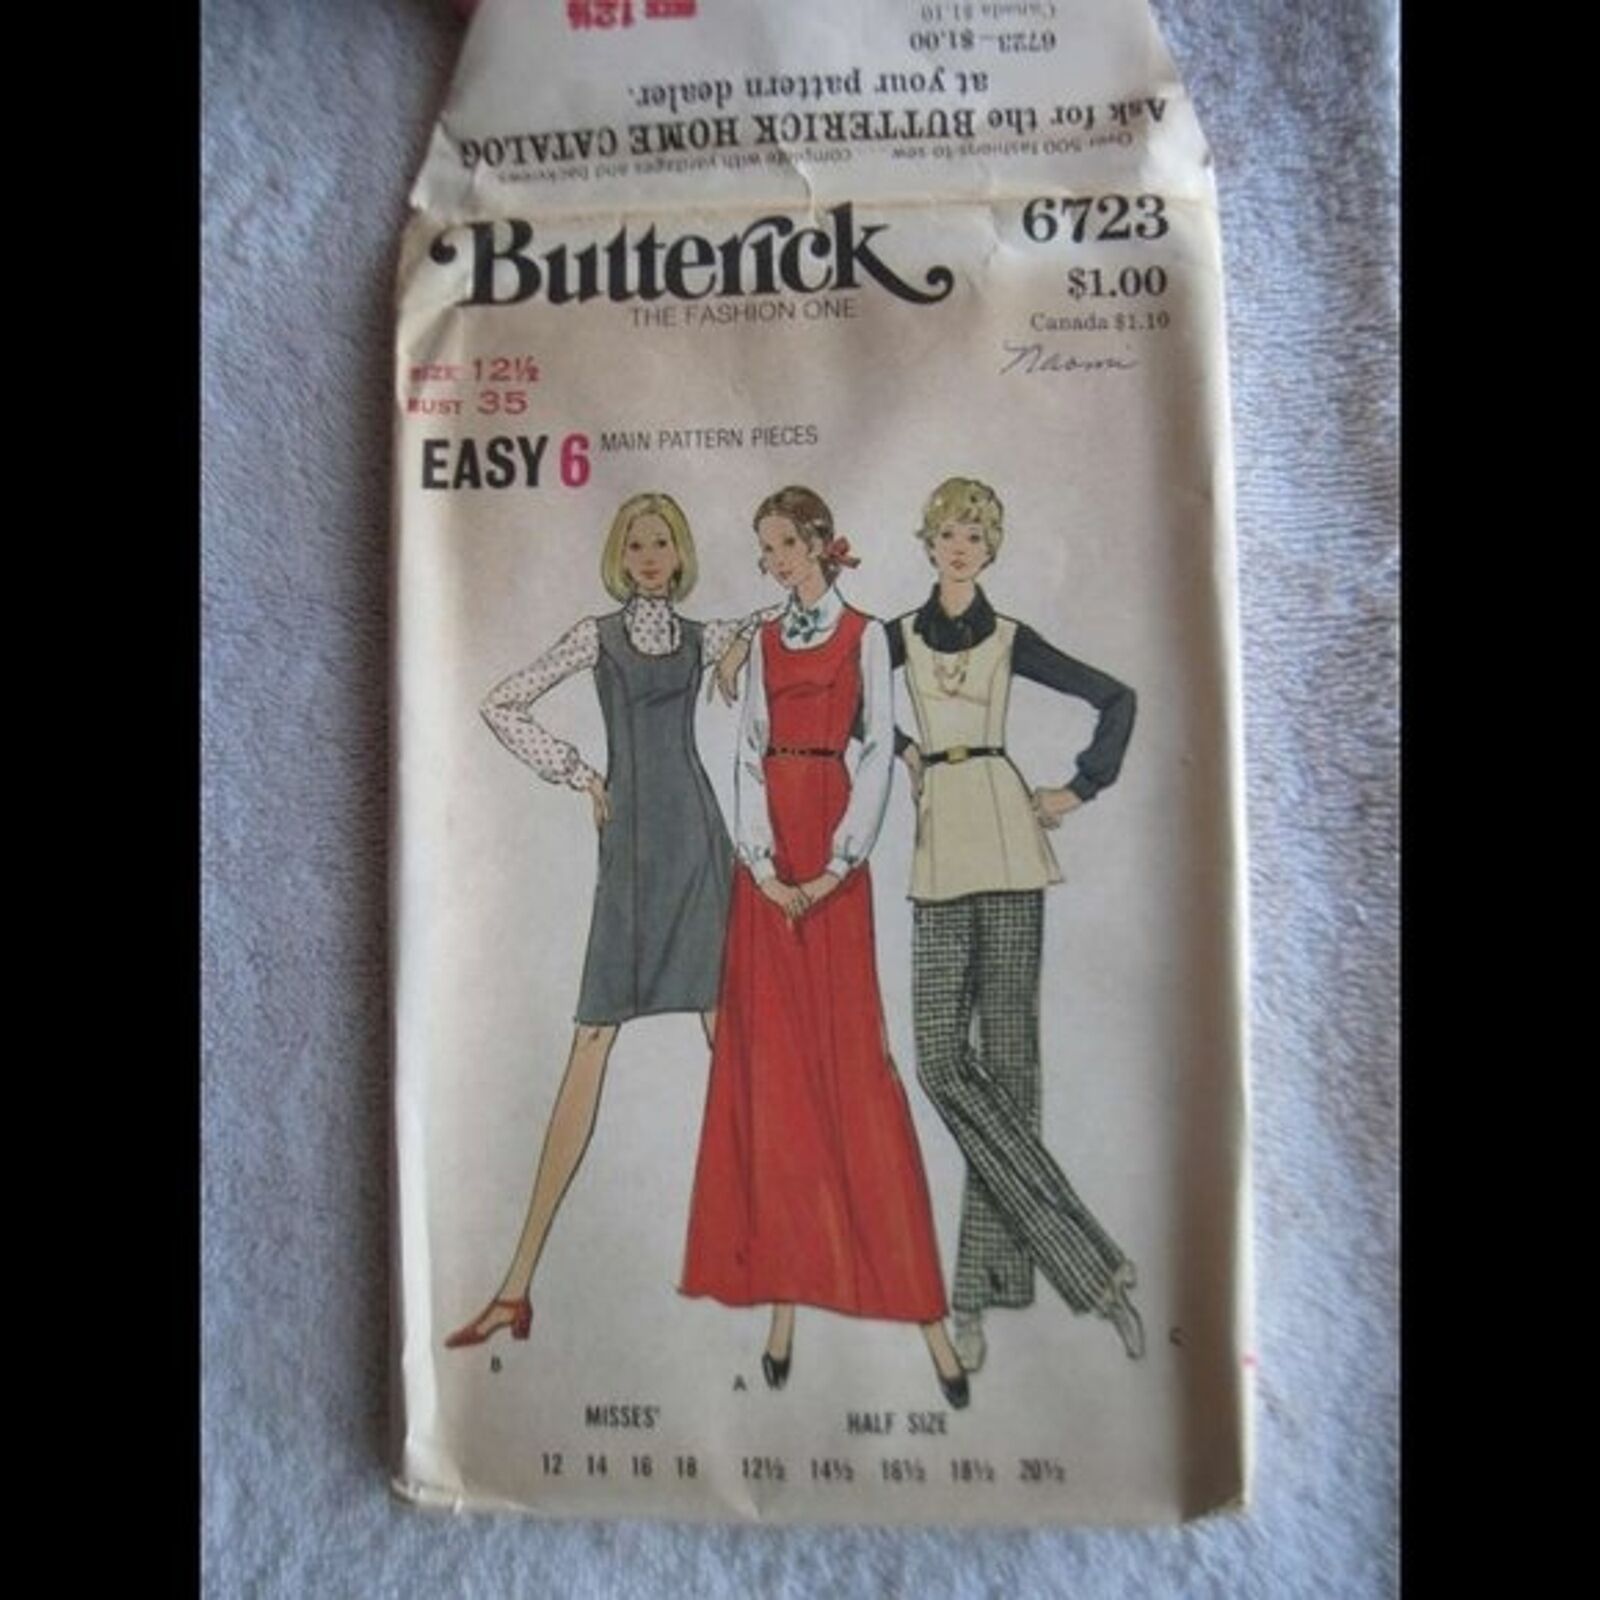 Butterick Fashion One 6723 Size 12 1/2 Bust 35 Misses\' & Half Jumper Tunic Pants